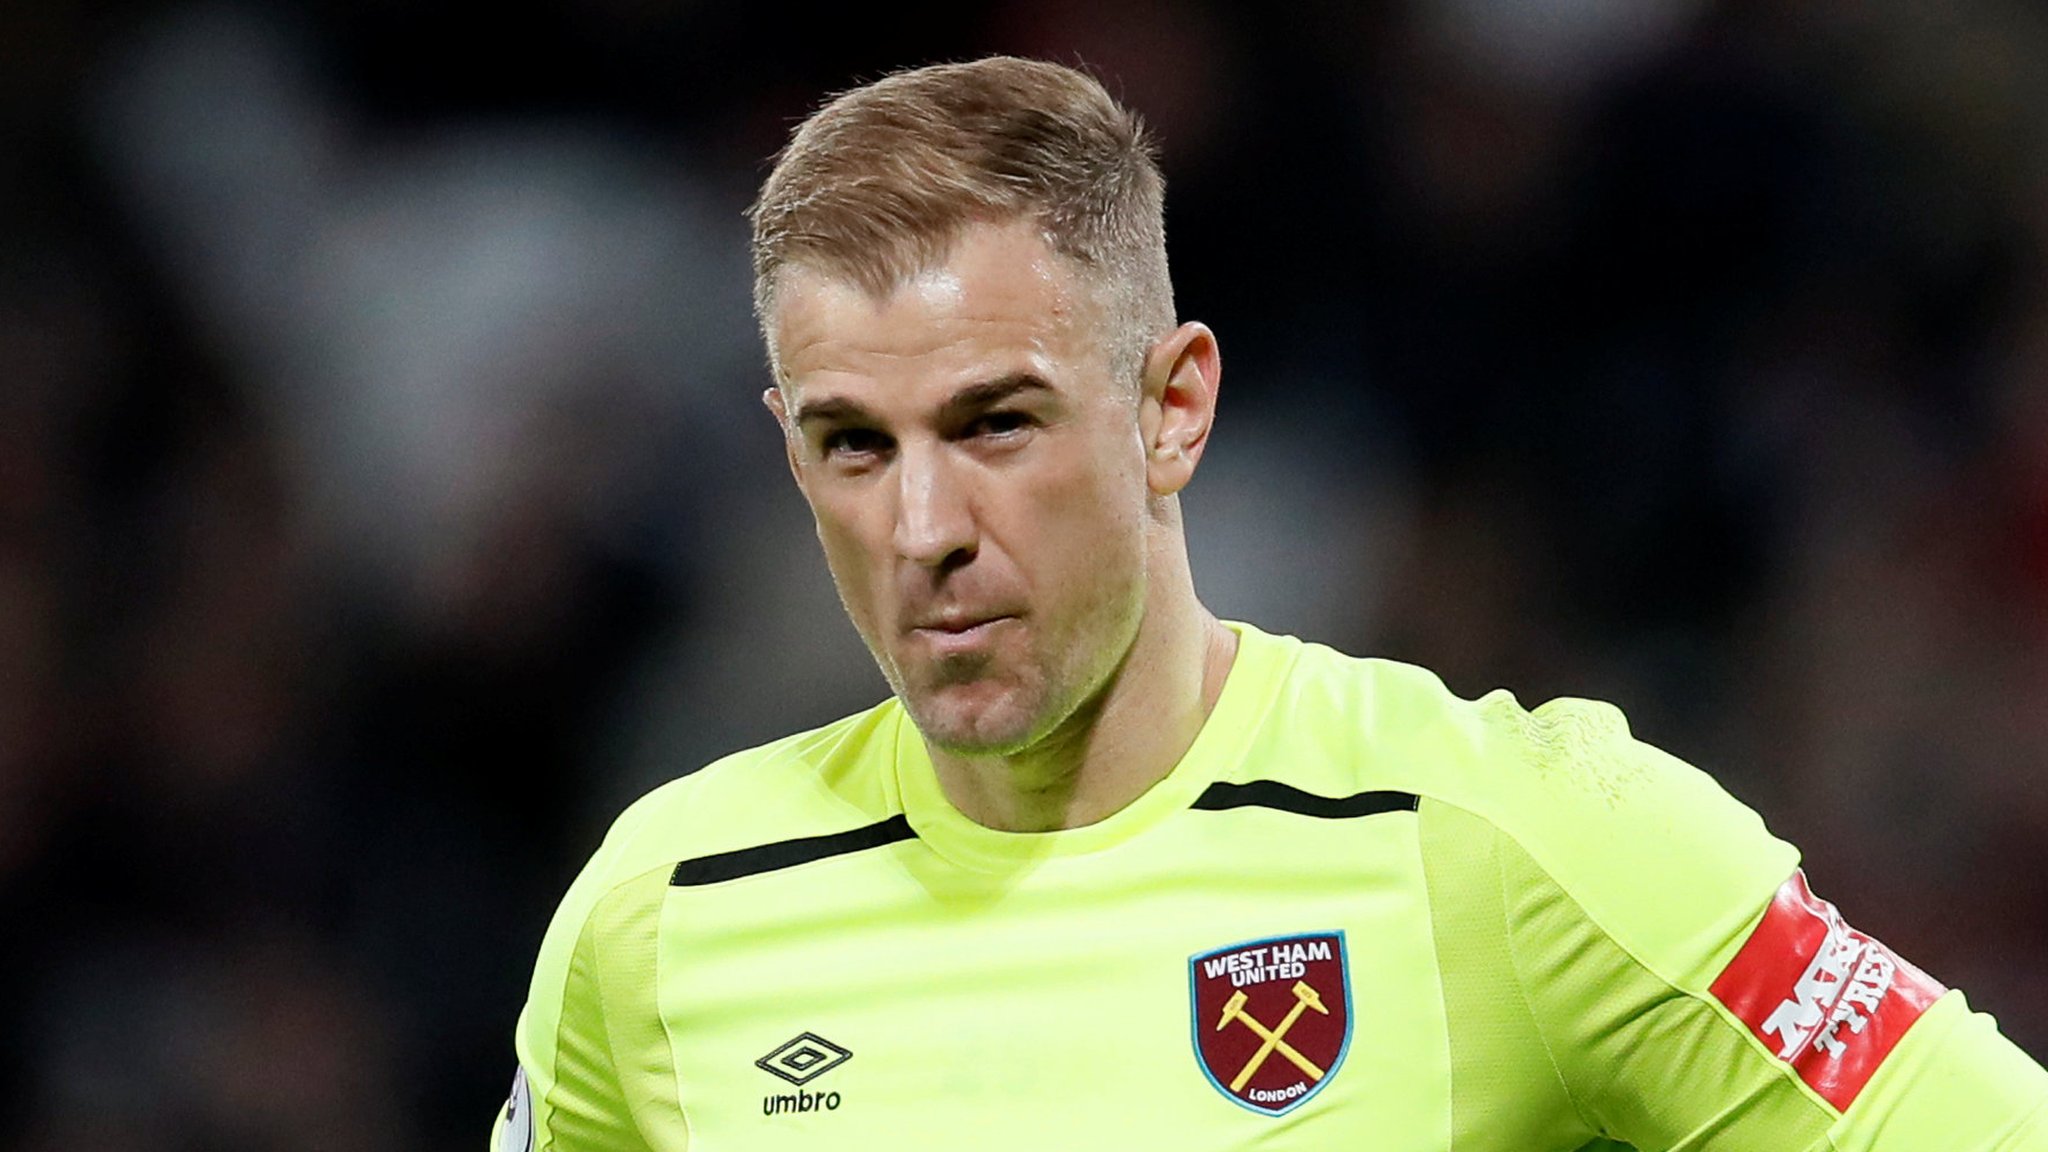 I know what I bring to the team - 'gutted' Hart on England omission